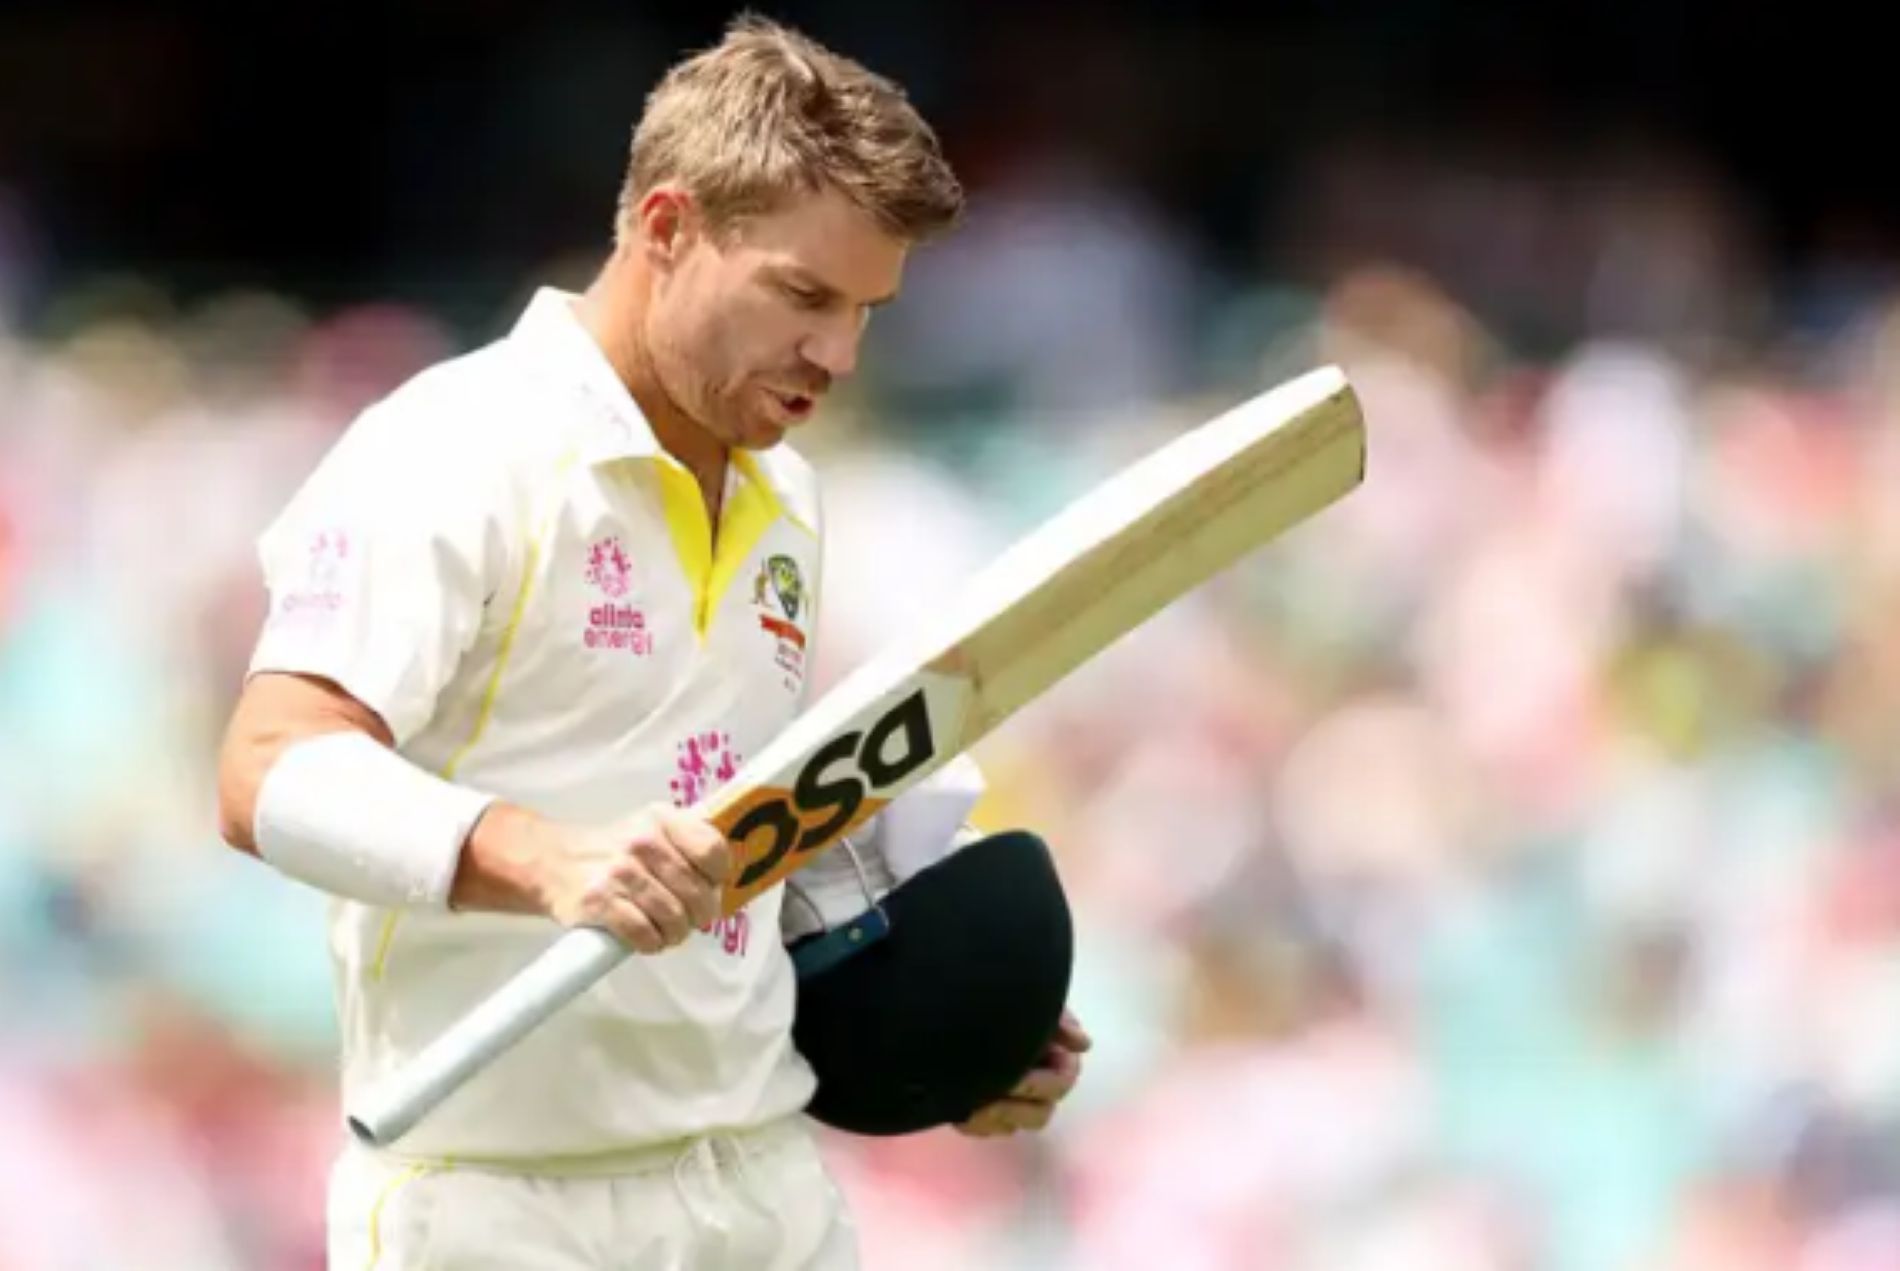 Warner could bid farewell to Test cricket after Australia